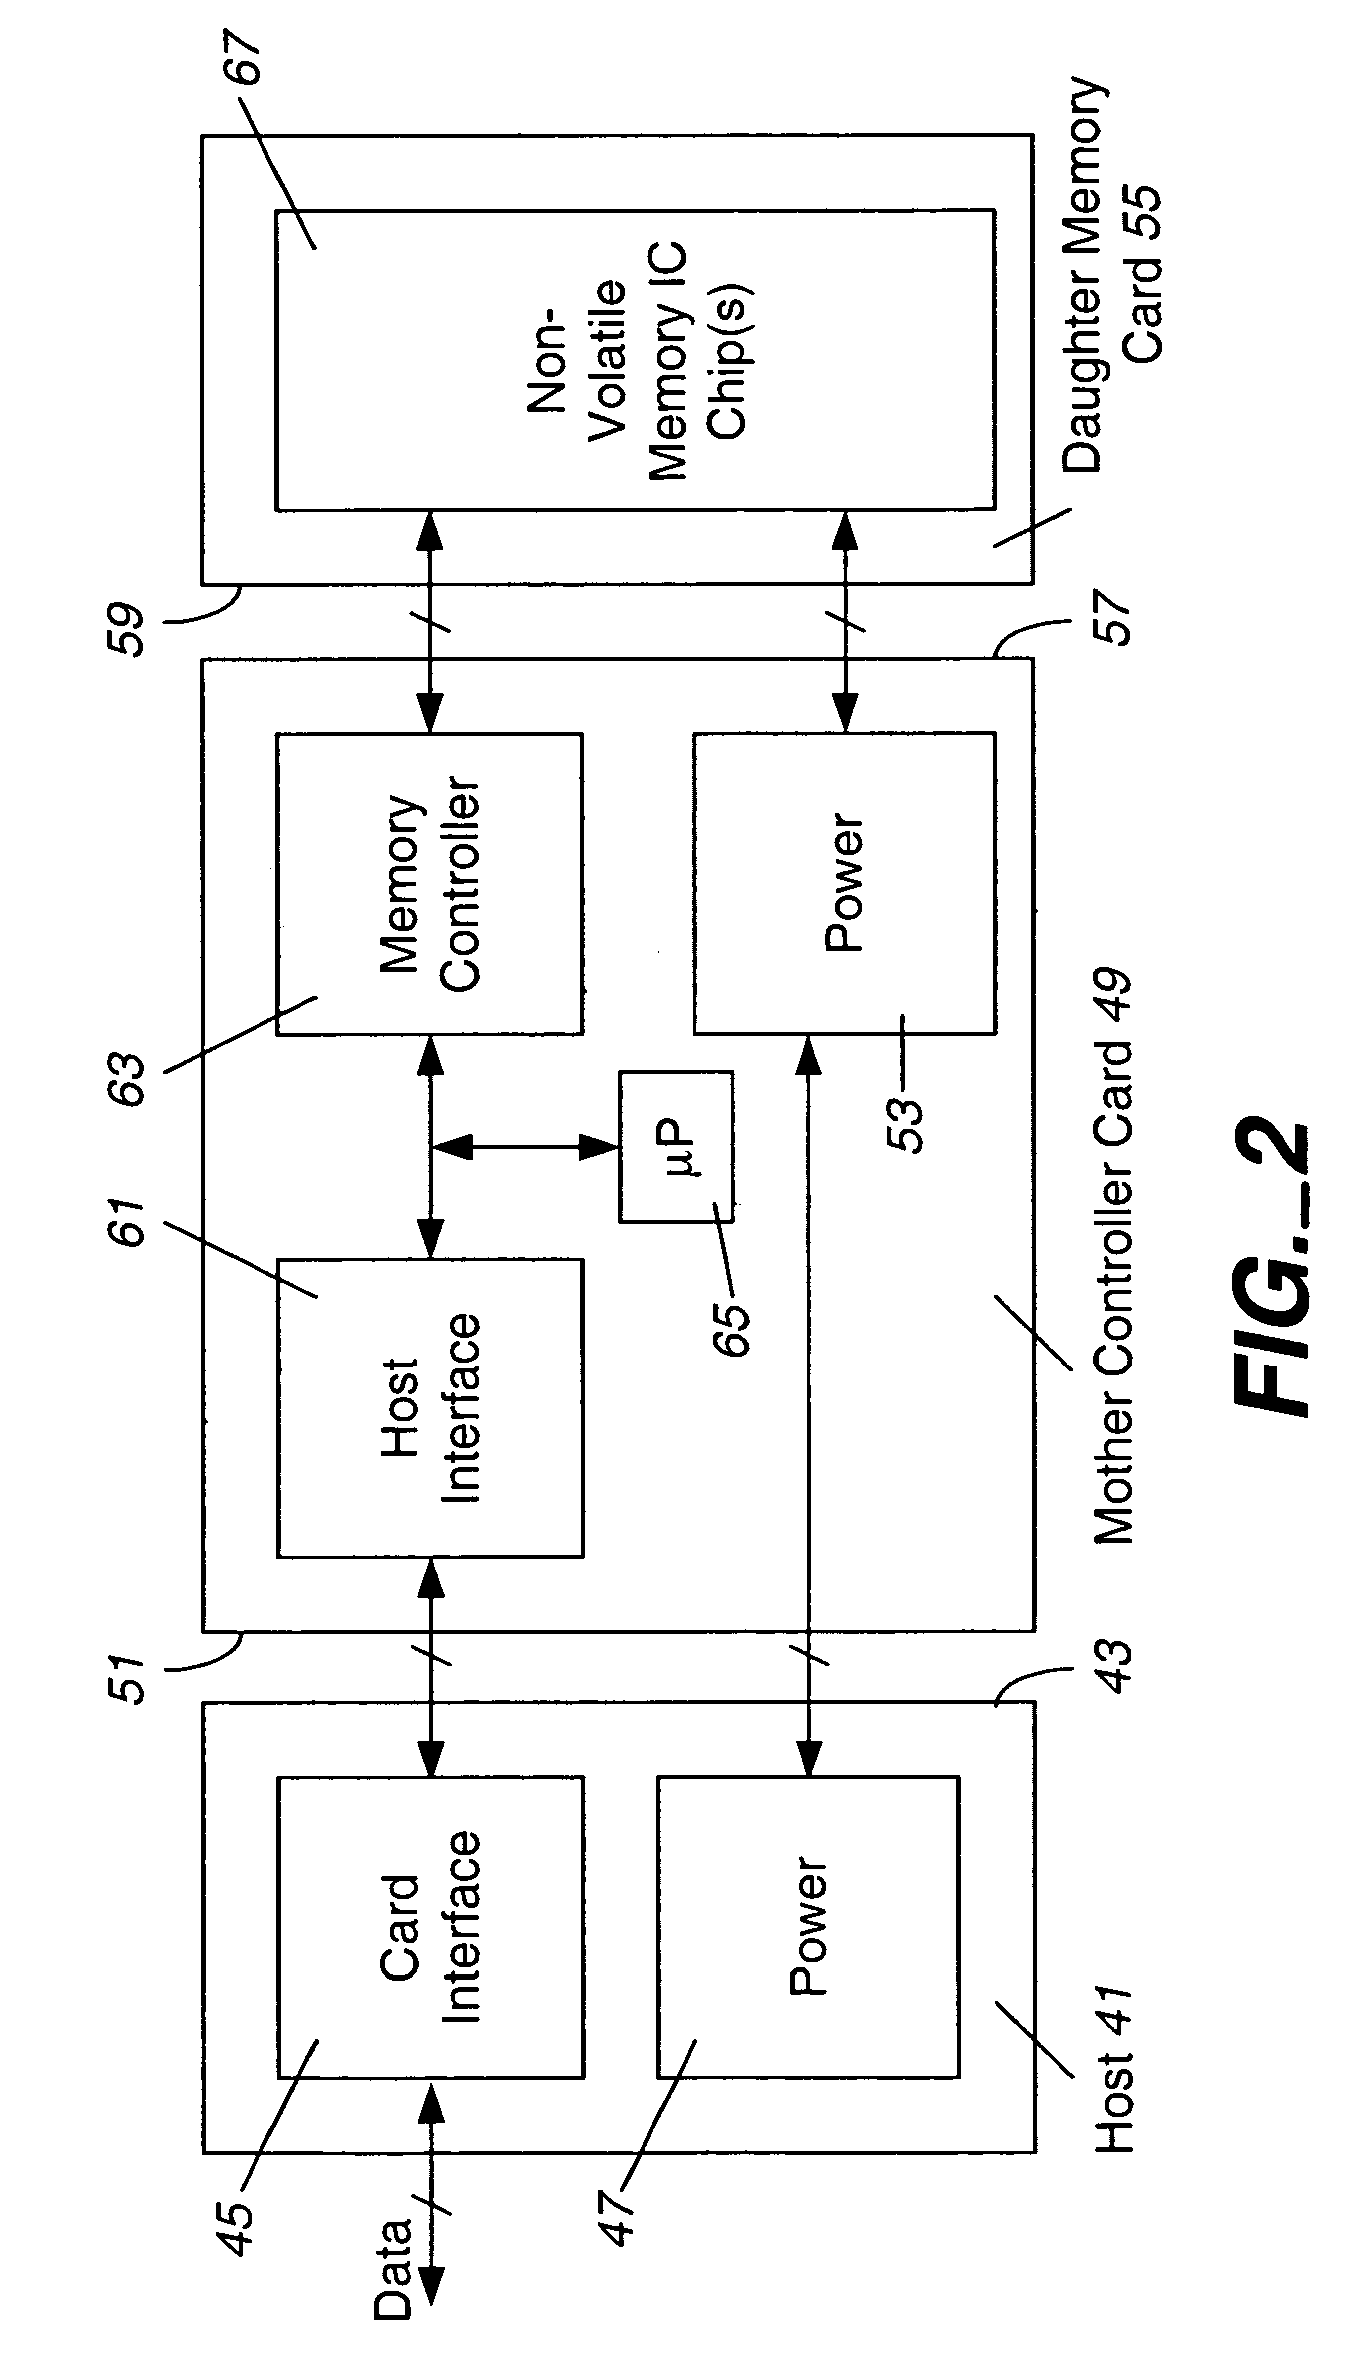 Universal non-volatile memory card used with various different standard cards containing a memory controller